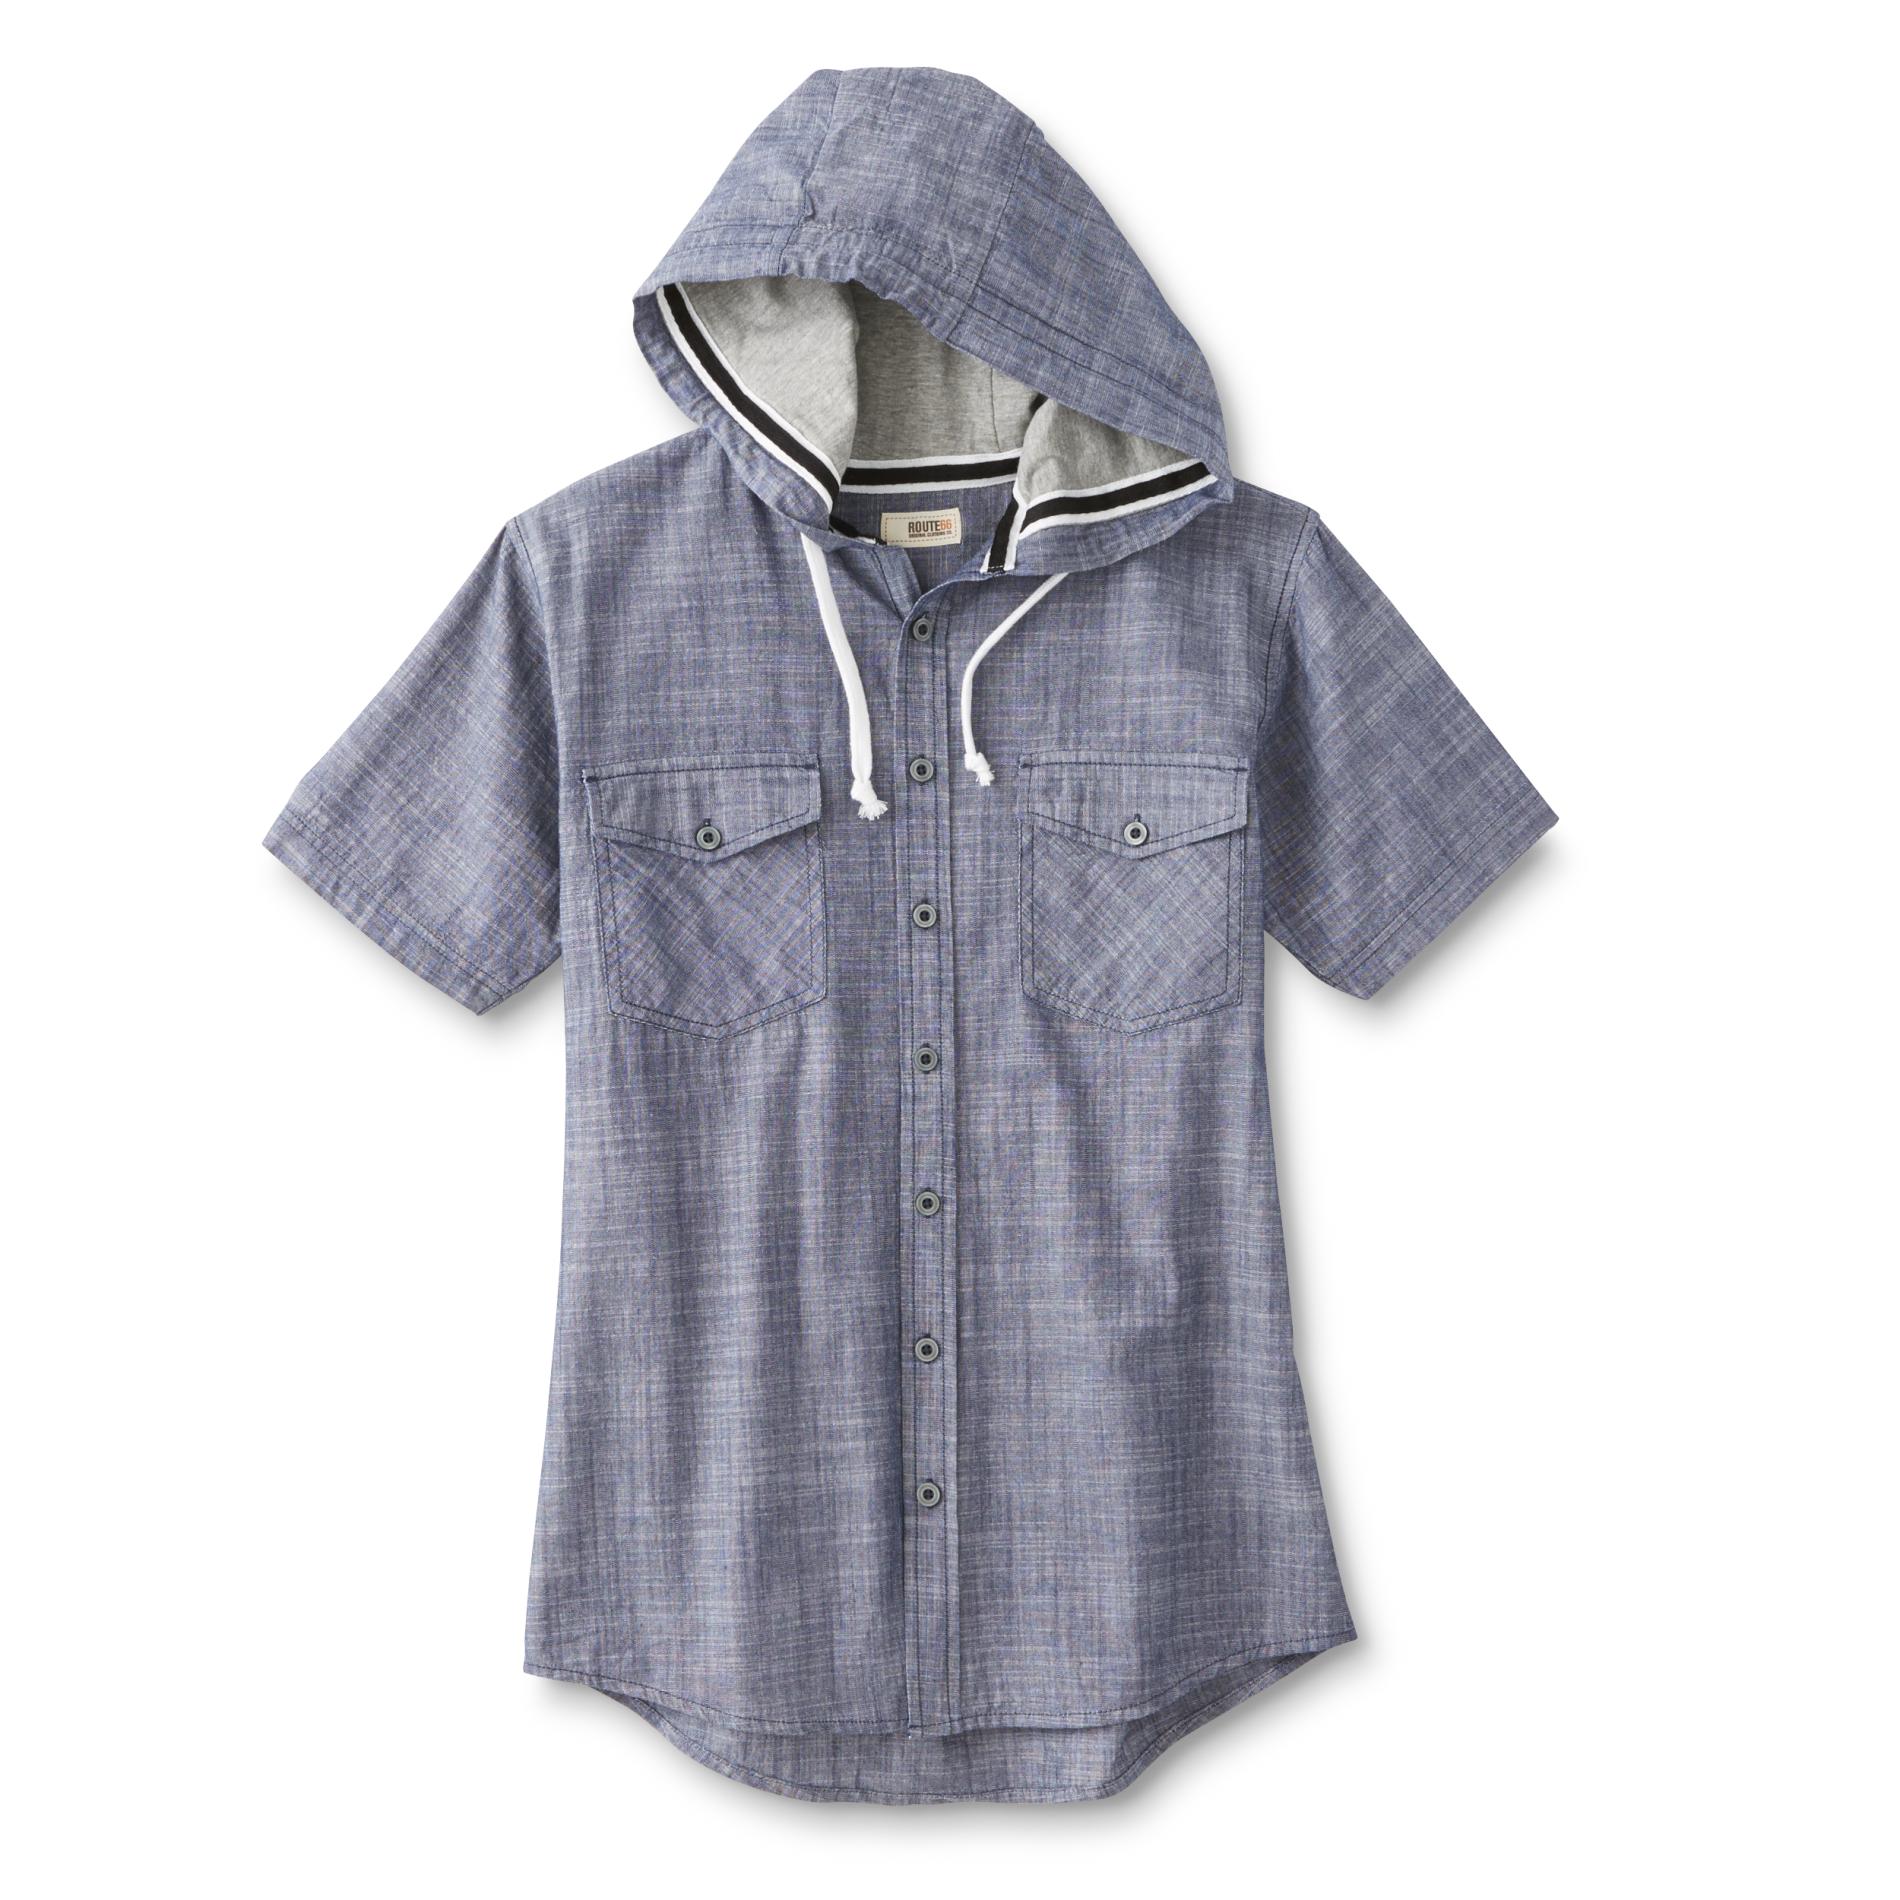 Route 66 Men's Hooded Button-Front Shirt